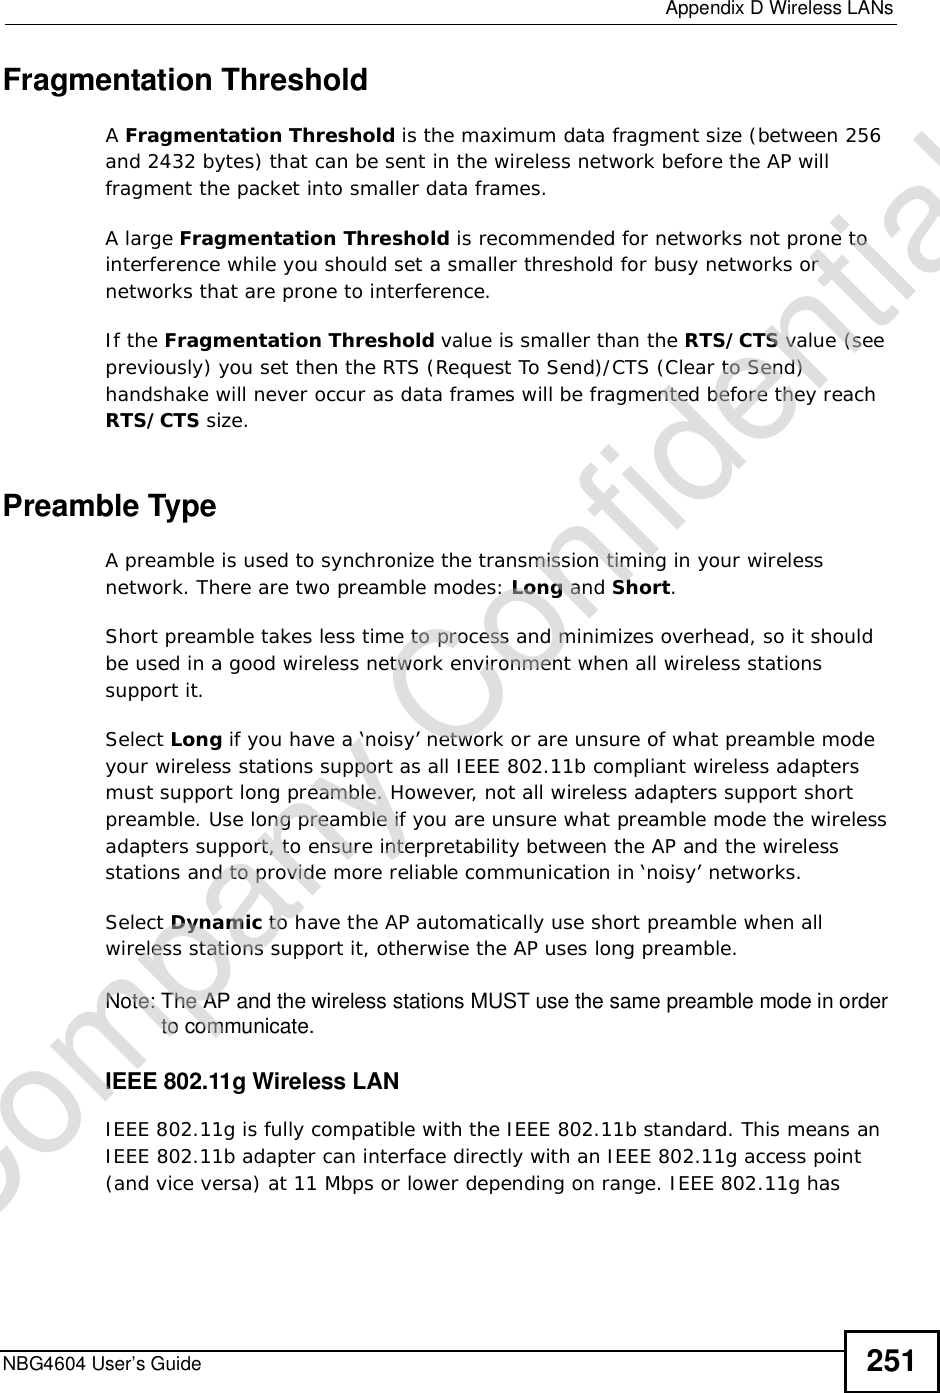  Appendix DWireless LANsNBG4604 User’s Guide 251Fragmentation ThresholdAFragmentation Threshold is the maximum data fragment size (between 256 and 2432 bytes) that can be sent in the wireless network before the AP will fragment the packet into smaller data frames.A large Fragmentation Threshold is recommended for networks not prone to interference while you should set a smaller threshold for busy networks or networks that are prone to interference.If the Fragmentation Threshold value is smaller than the RTS/CTS value (see previously) you set then the RTS (Request To Send)/CTS (Clear to Send) handshake will never occur as data frames will be fragmented before they reach RTS/CTS size.Preamble TypeA preamble is used to synchronize the transmission timing in your wireless network. There are two preamble modes: Long and Short.Short preamble takes less time to process and minimizes overhead, so it should be used in a good wireless network environment when all wireless stations support it. Select Long if you have a ‘noisy’ network or are unsure of what preamble mode your wireless stations support as all IEEE 802.11b compliant wireless adapters must support long preamble. However, not all wireless adapters support short preamble. Use long preamble if you are unsure what preamble mode the wireless adapters support, to ensure interpretability between the AP and the wireless stations and to provide more reliable communication in ‘noisy’ networks. Select Dynamic to have the AP automatically use short preamble when all wireless stations support it, otherwise the AP uses long preamble.Note: The AP and the wireless stations MUSTuse the same preamble mode in order to communicate.IEEE 802.11g Wireless LANIEEE 802.11g is fully compatible with the IEEE 802.11b standard. This means an IEEE 802.11b adapter can interface directly with an IEEE 802.11g access point (and vice versa) at 11 Mbps or lower depending on range. IEEE 802.11g has Company Confidential